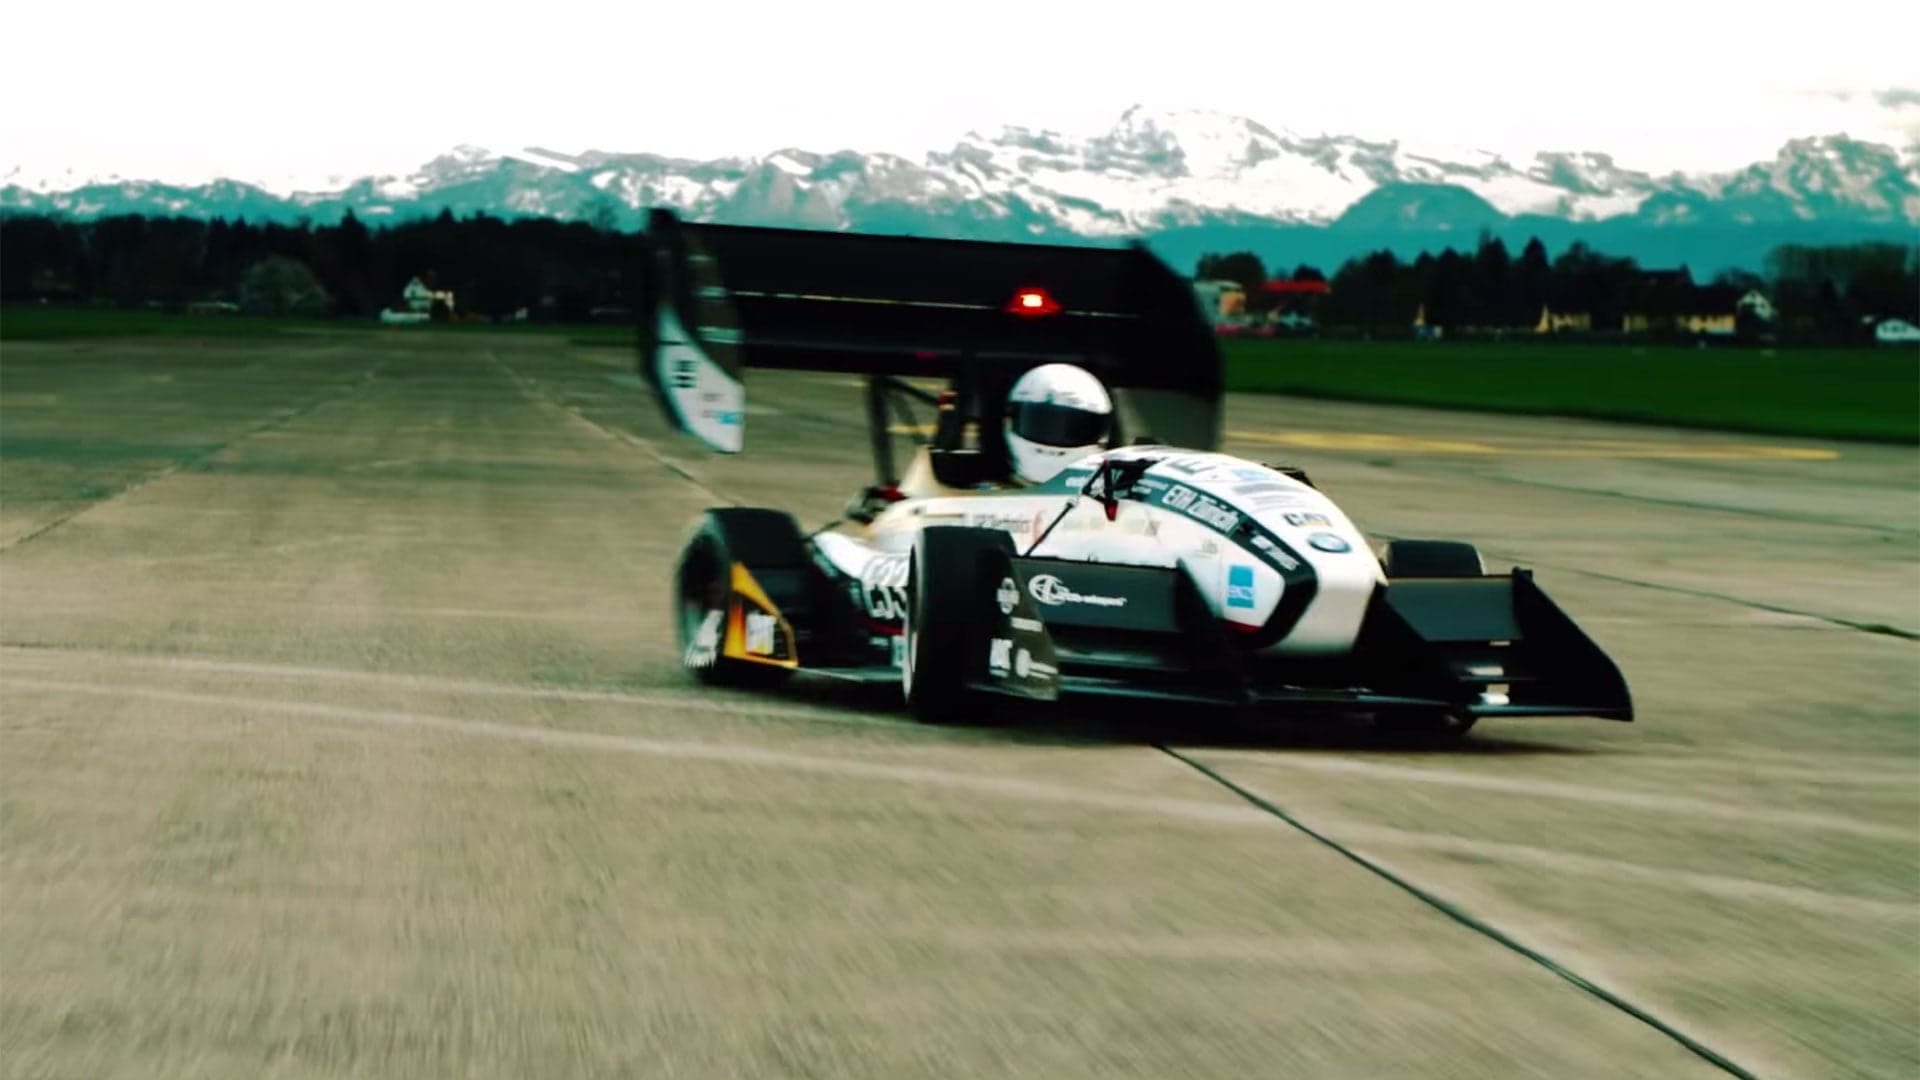 Watch This College-Made Electric Car Blast from 0 to 60 in 1.5 Seconds